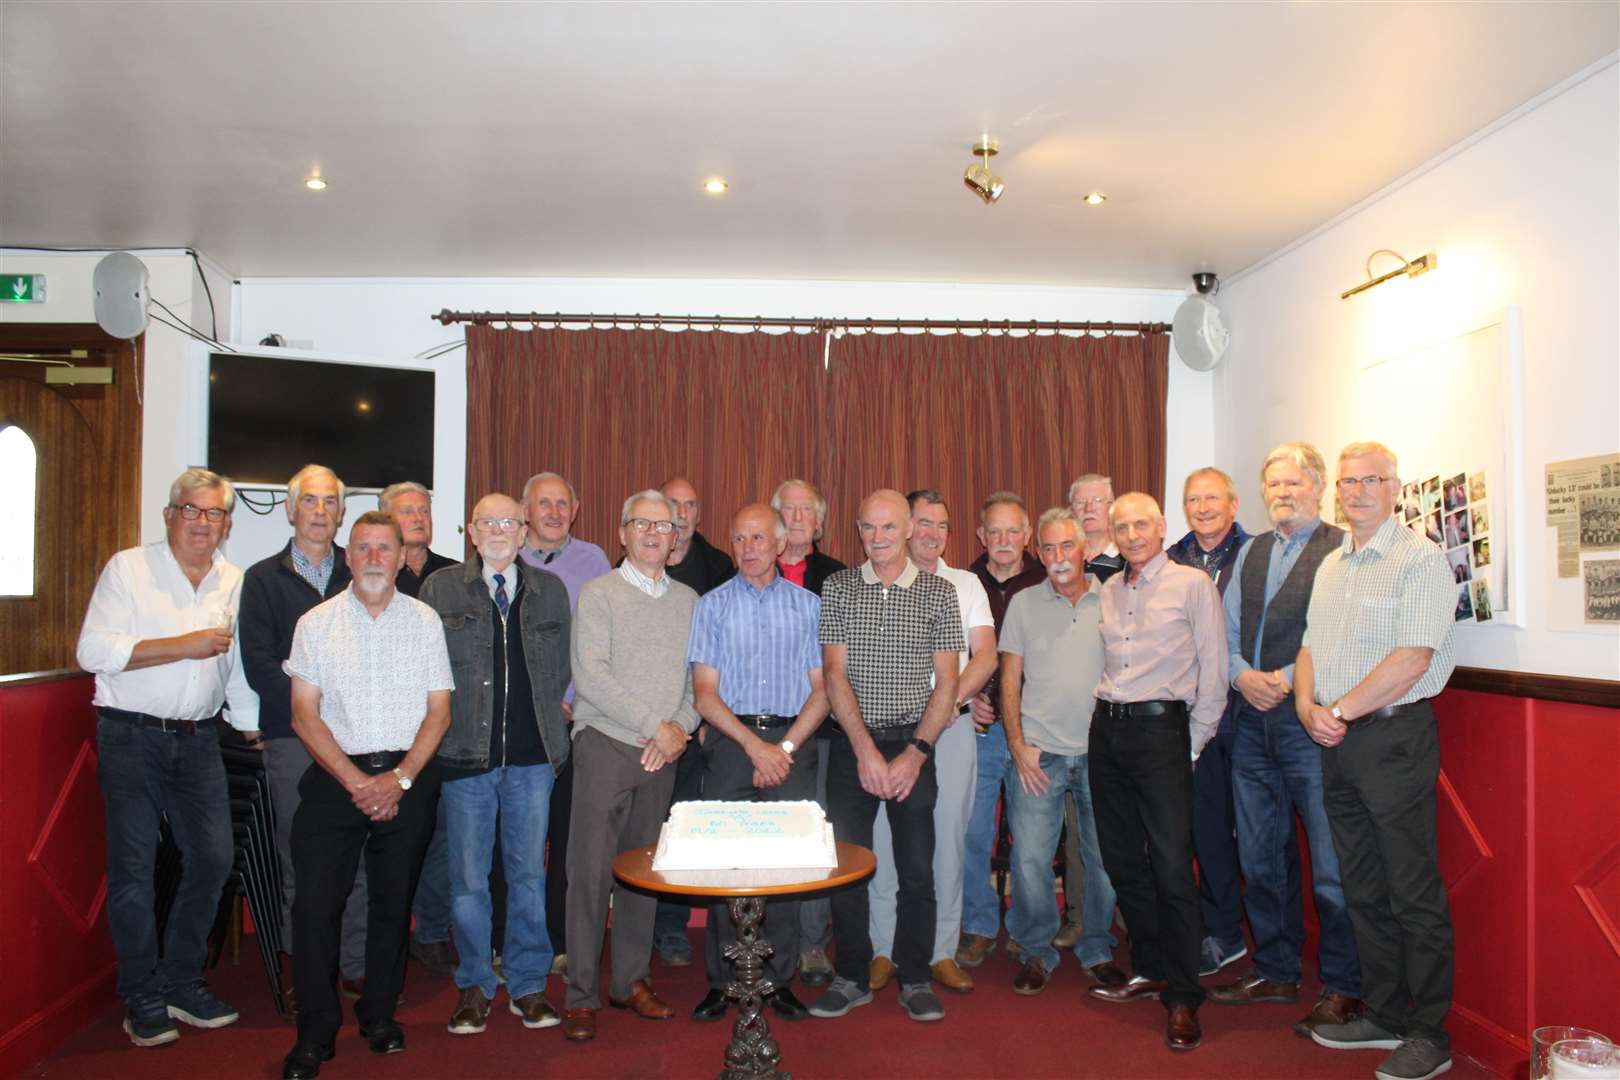 Members of Loco's A met at the Black Bull for the 50th anniversary. Picture: Griselda McGregor